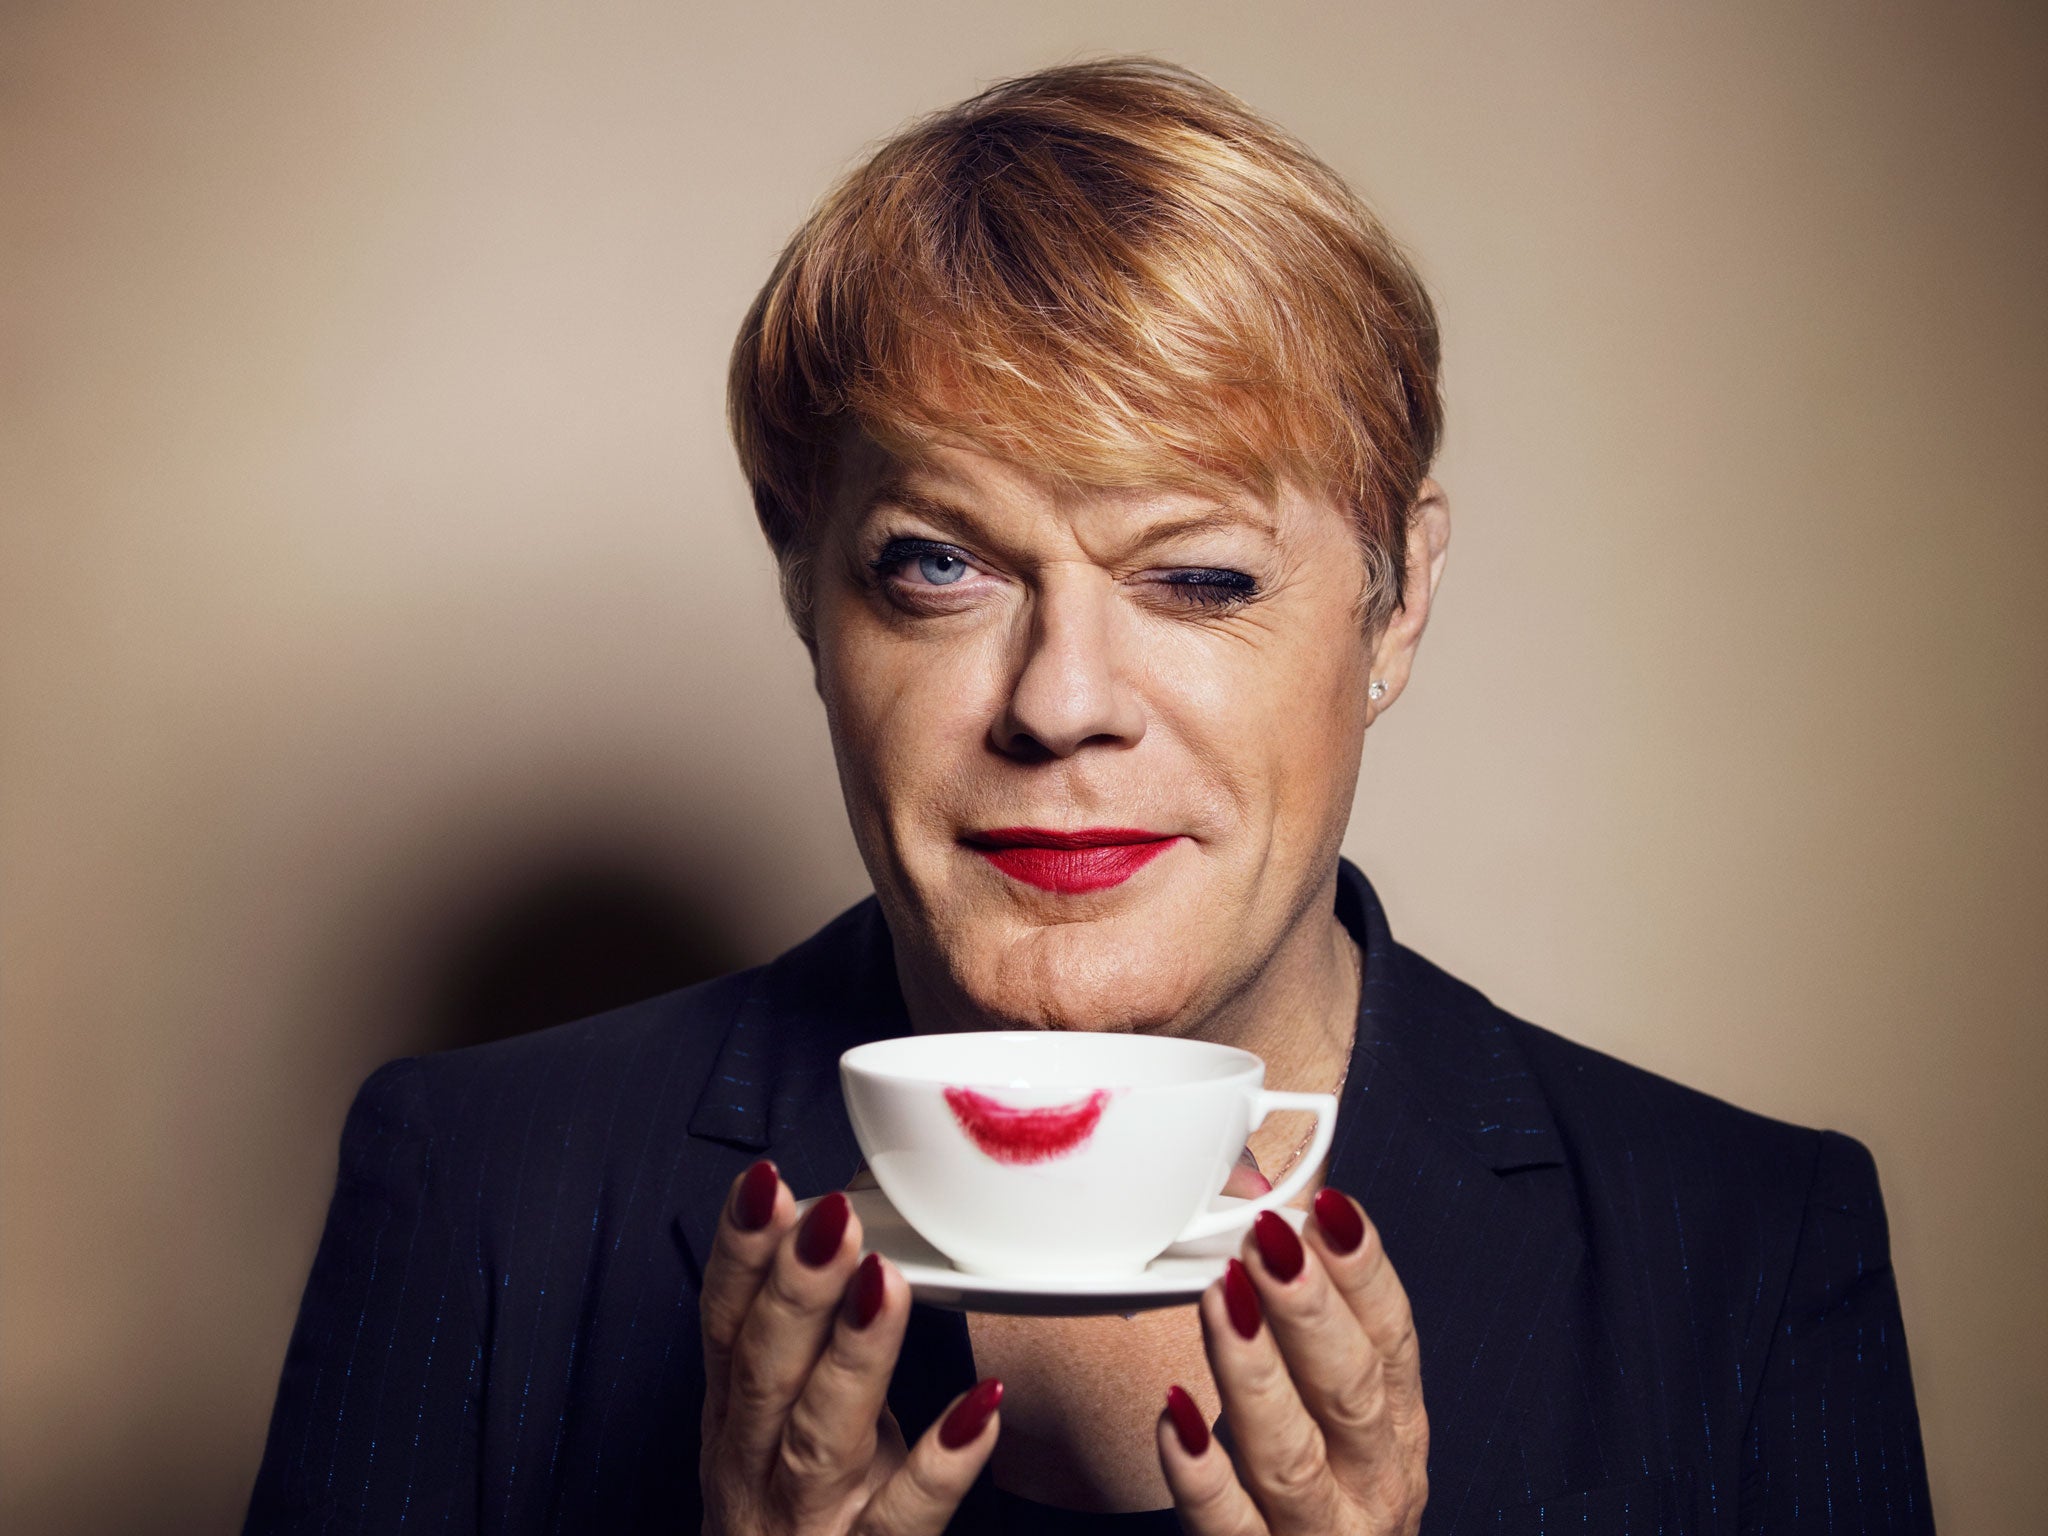 Izzard is smart, passionate, engaged, warm, human. But to a lot of the electorate he might just seem too, well, out there.